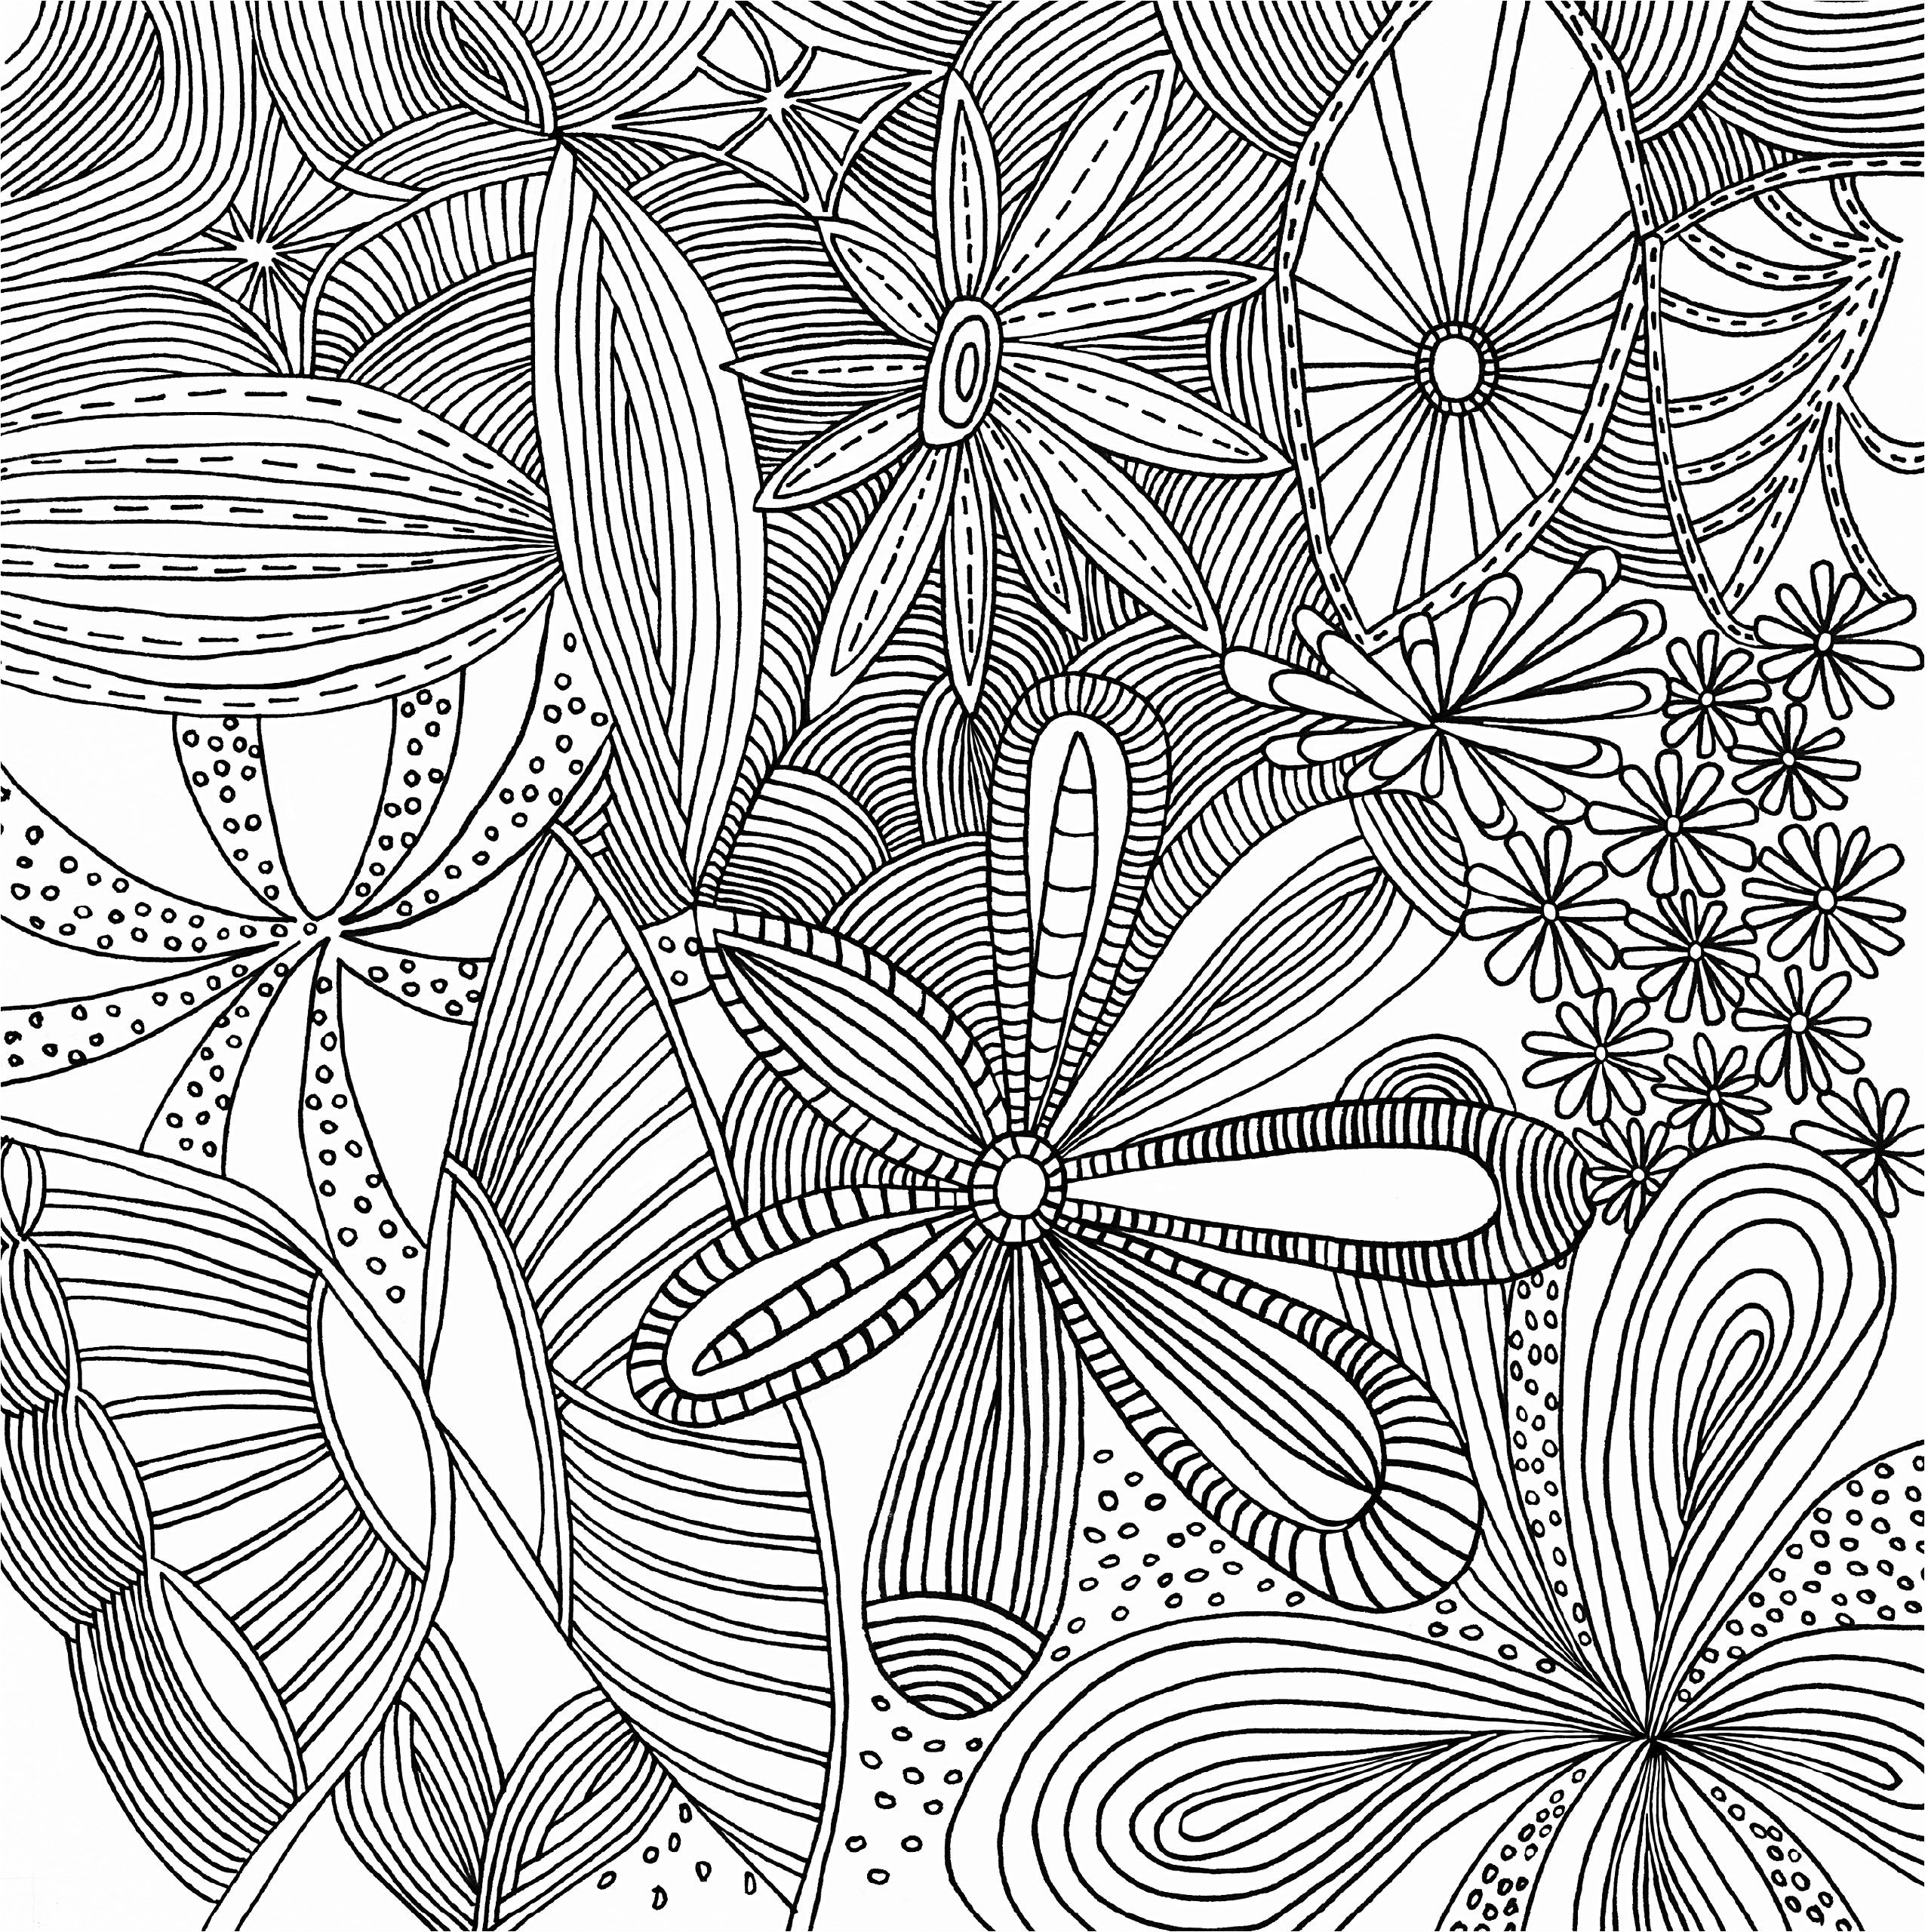 25 Popular White Owl Vase 2023 free download white owl vase of cool vases flower vase coloring page pages flowers in a top i 0d with regard to owl coloring pages awesome fresh free owl coloring pages elegant of cool vases flower vase c